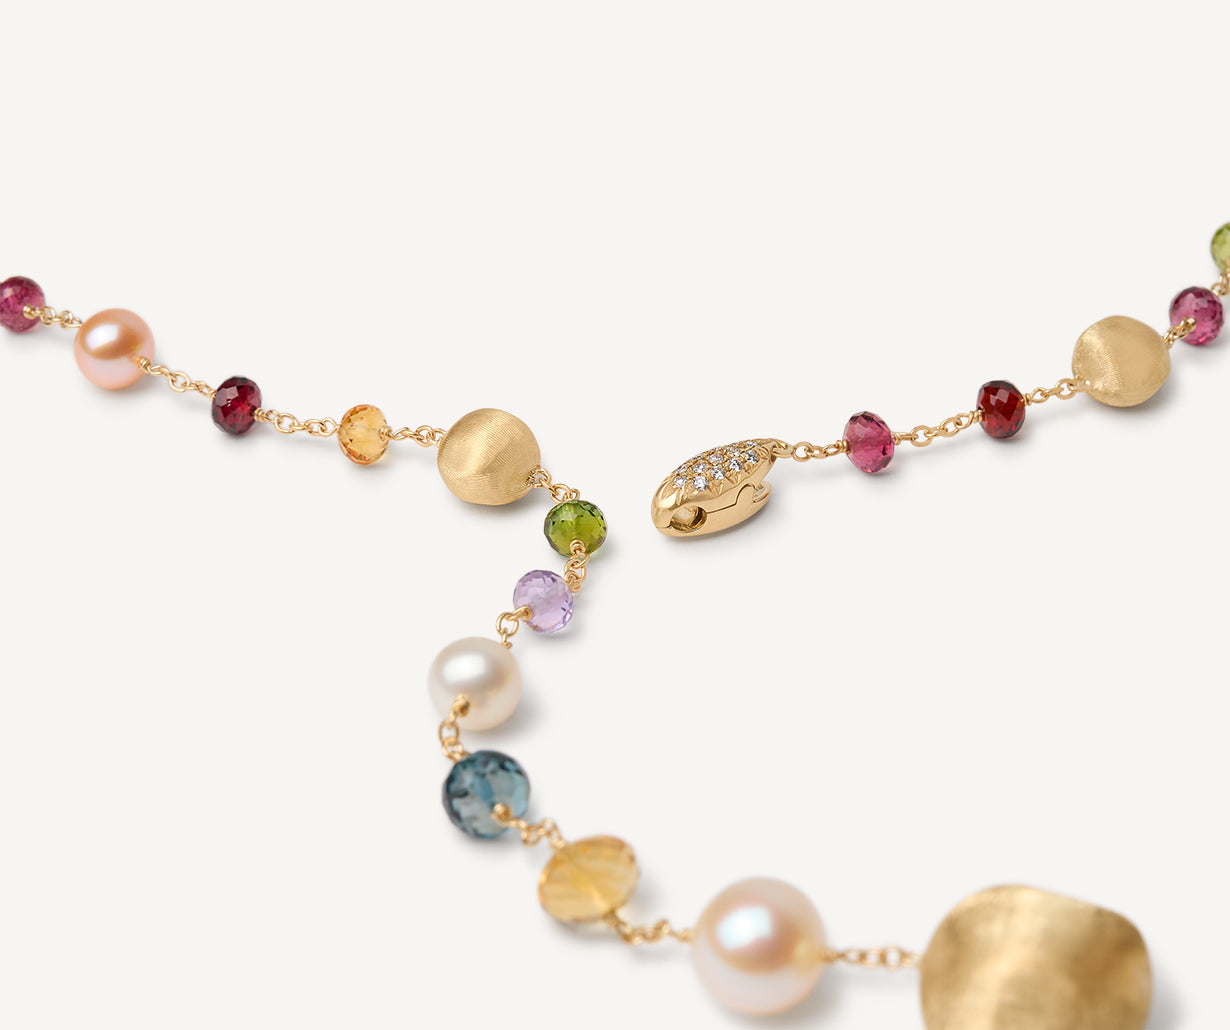 Mixed gemstones with 18k yellow gold and diamonds Africa necklace lariat design by Marco Bicego